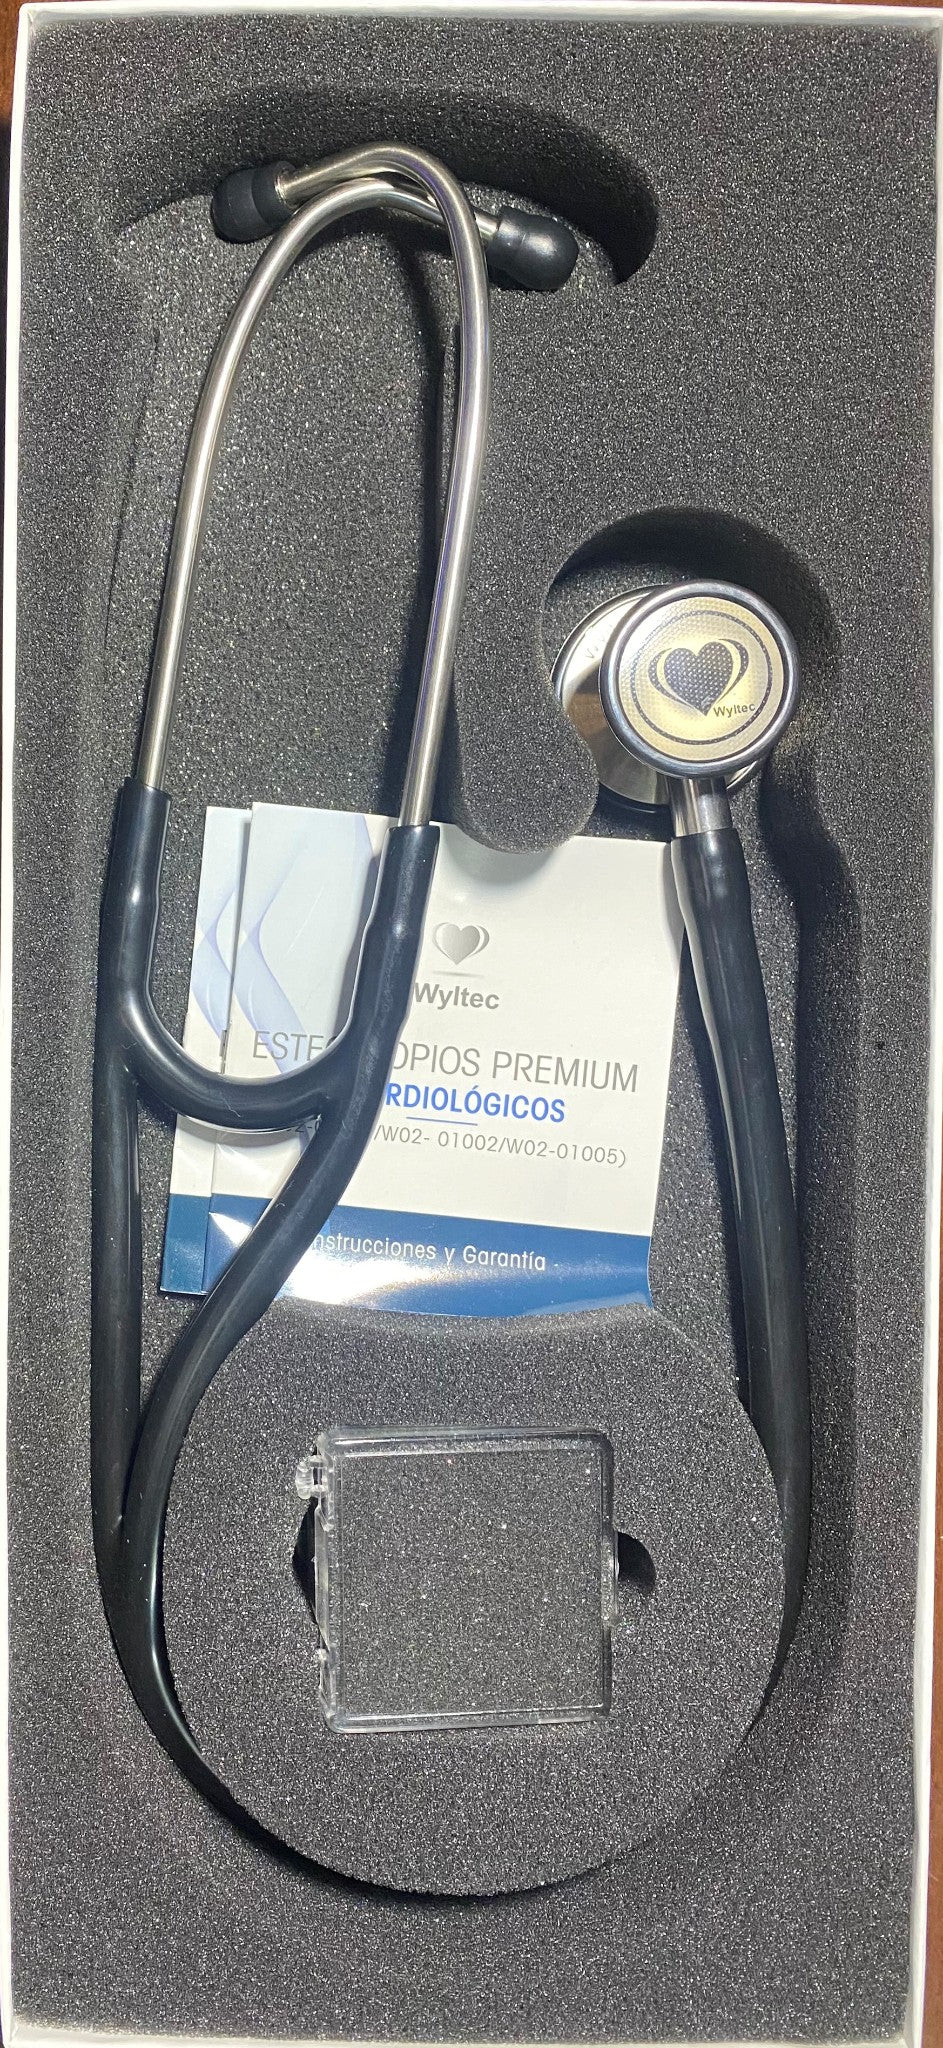 Wyltec W02-01005 Deluxe Cardiology Stethoscope Dual Head Stainless Steel (Black)